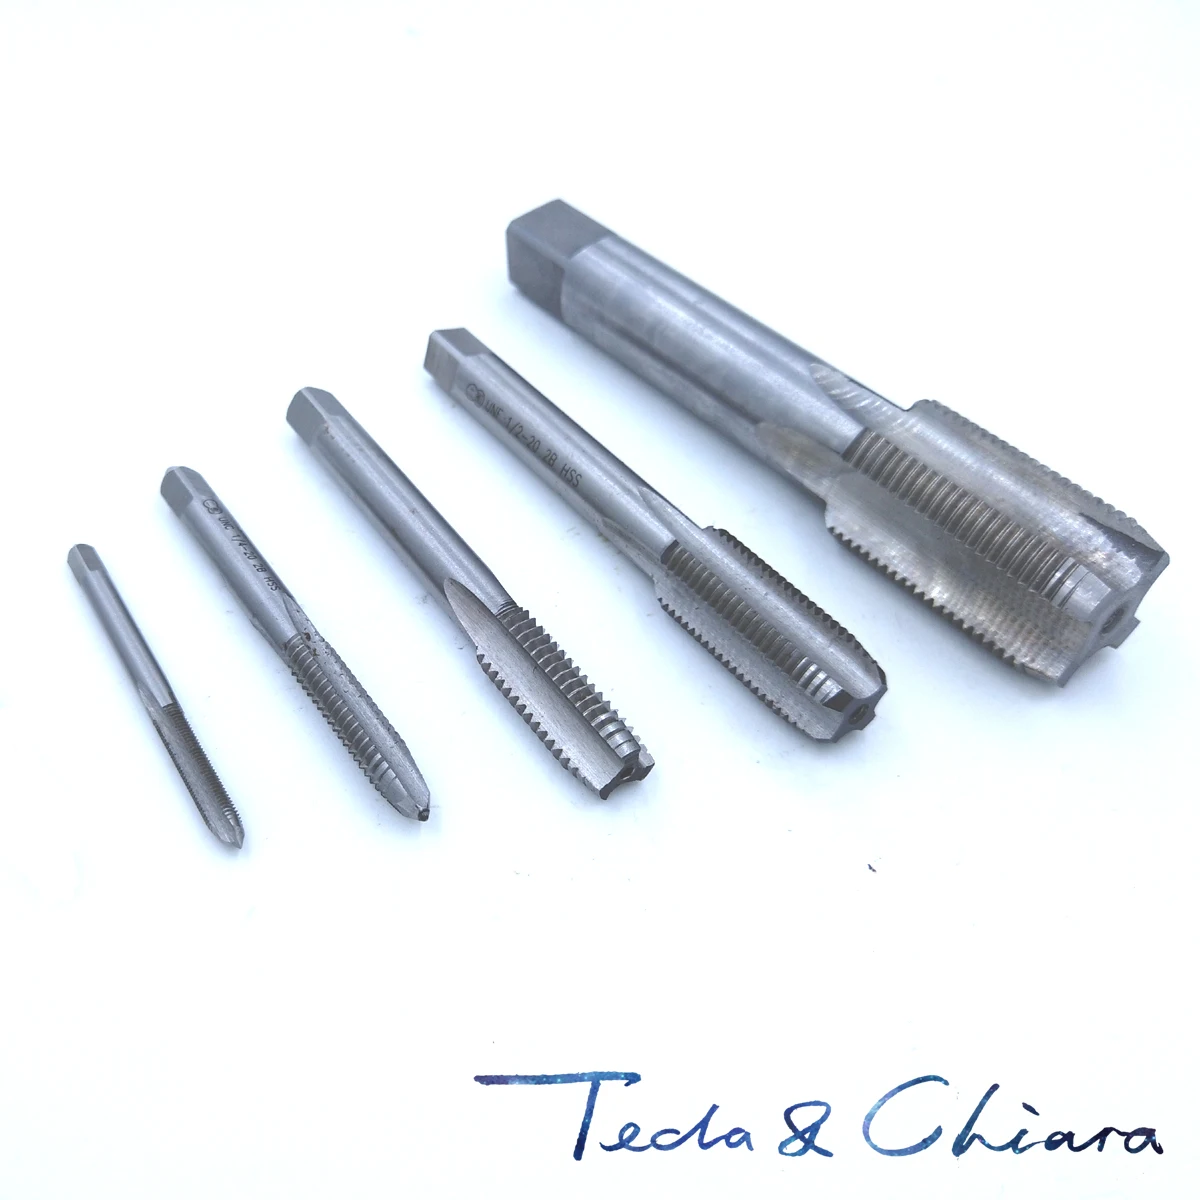 

1Pc 9/16 - 12 14 16 18 20 24 28 32 36 40 UNC UNS UN UNF UNEF HSS Right Hand Tap TPI Threading Tools For Mold Machining 9/16"